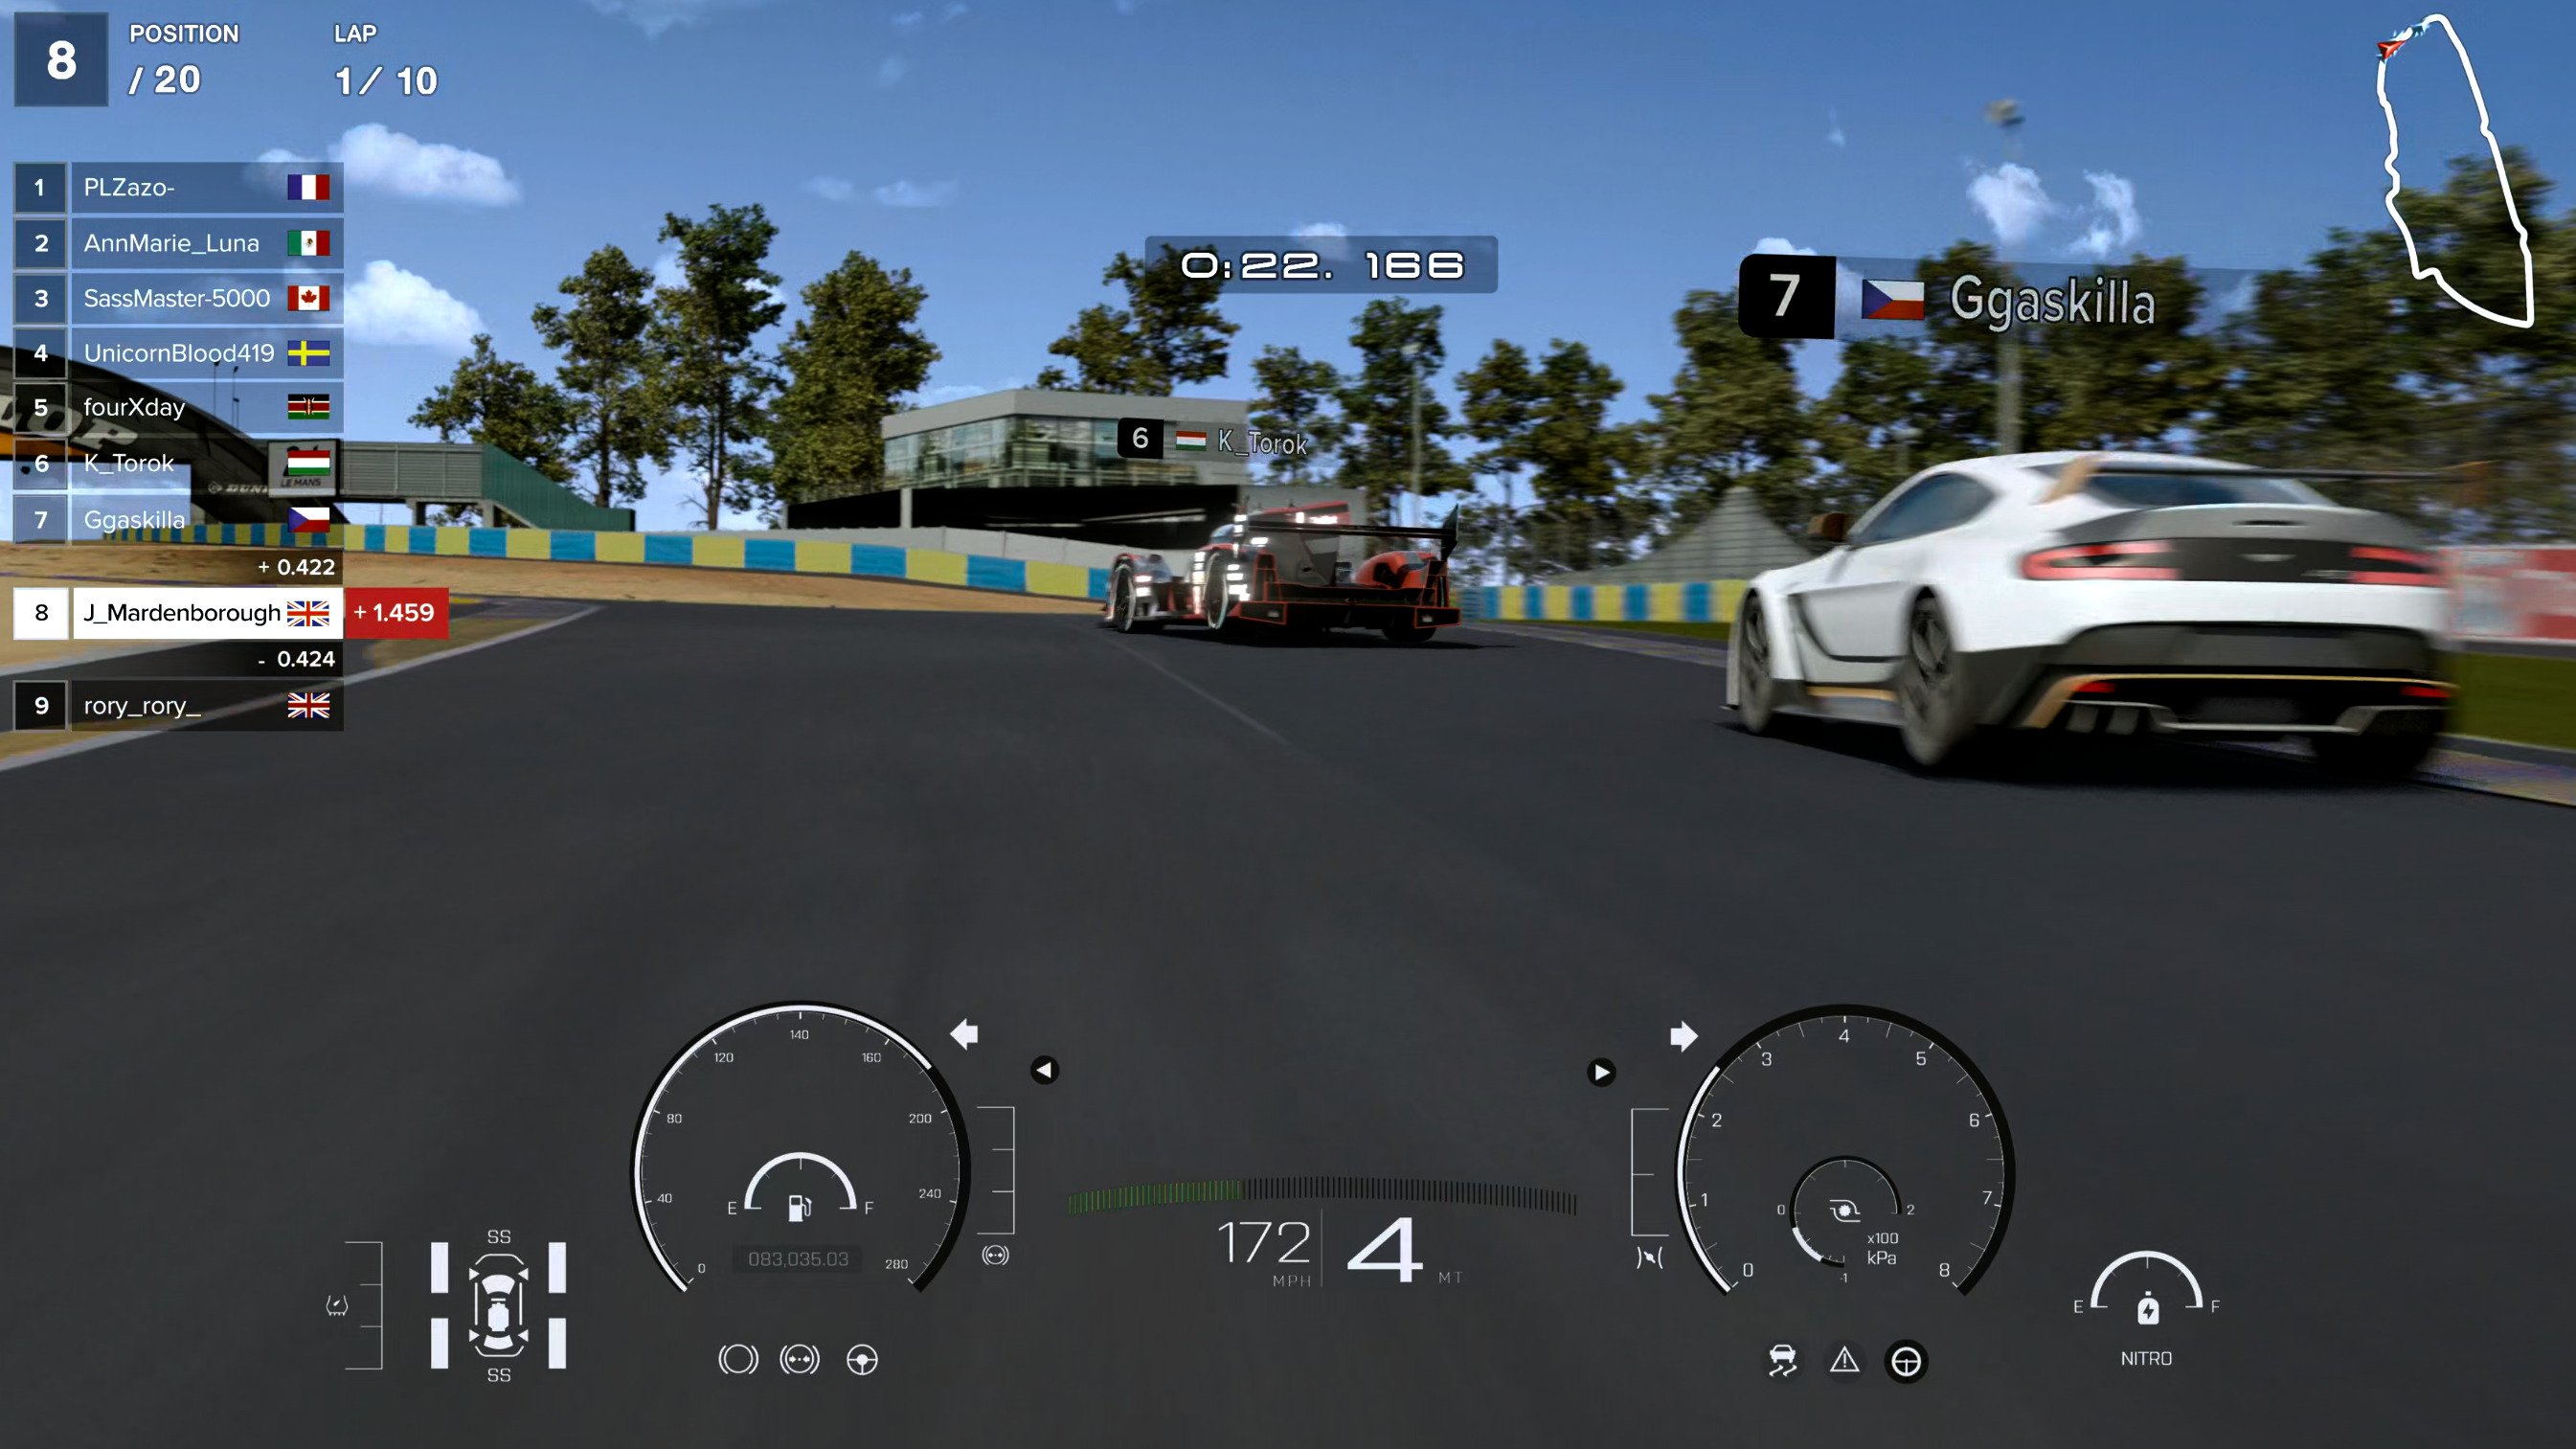 Ways The Gran Turismo Film Will Be Like The Games, And Ways It Won't